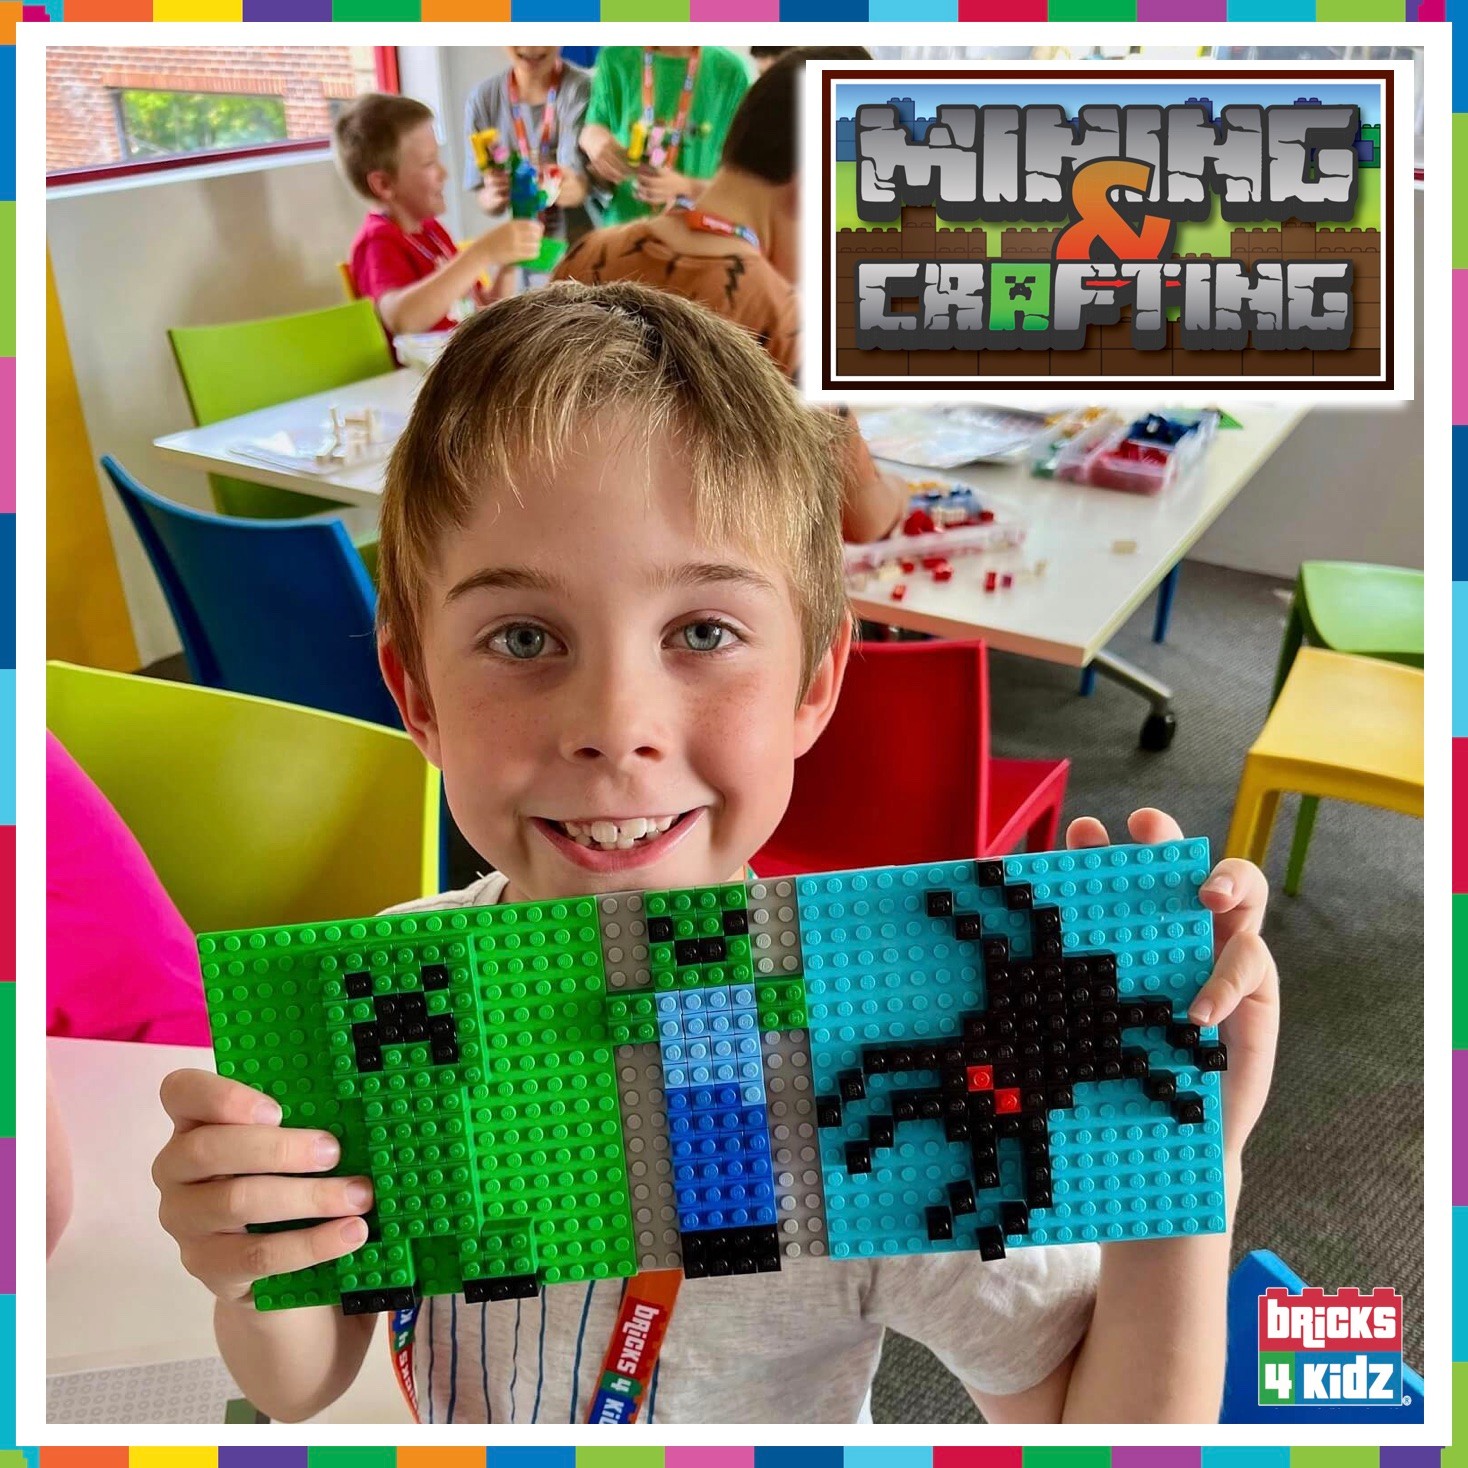 Mining and Crafting LEGO Workshop in Belmont